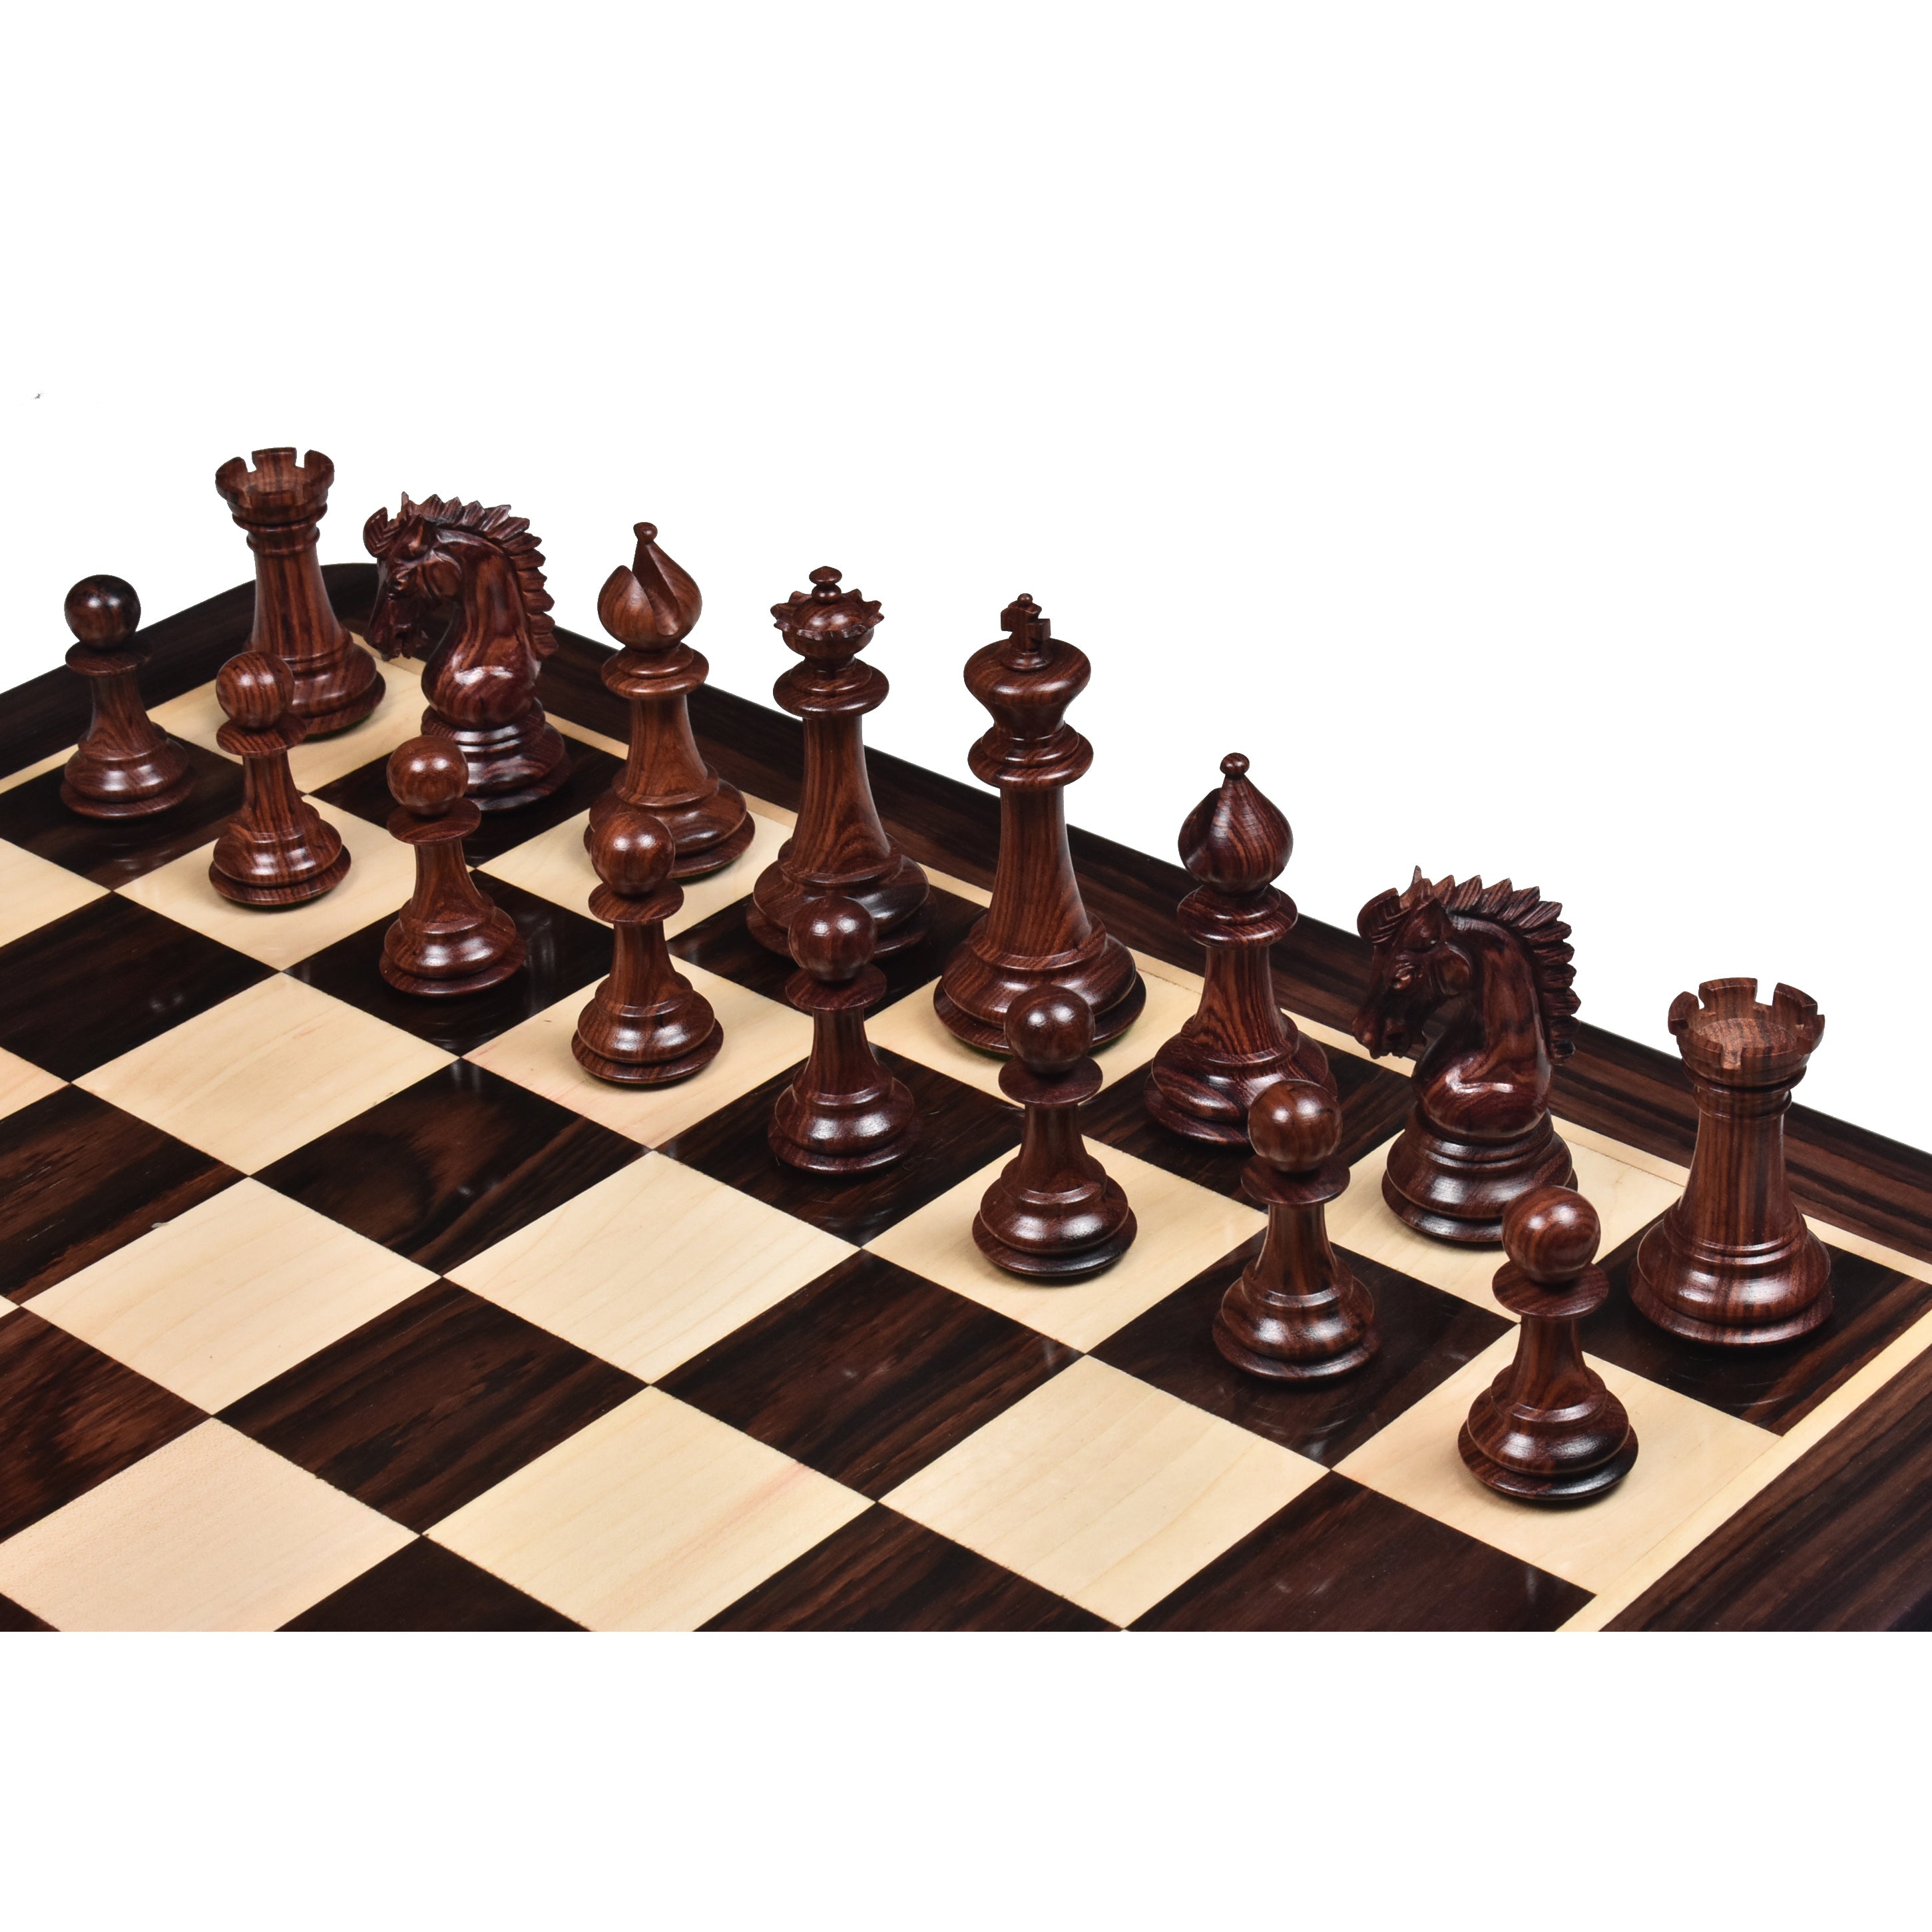 3.7" Emperor Series Staunton Chess set- Chess Pieces Only- Double Weighted Rose Wood